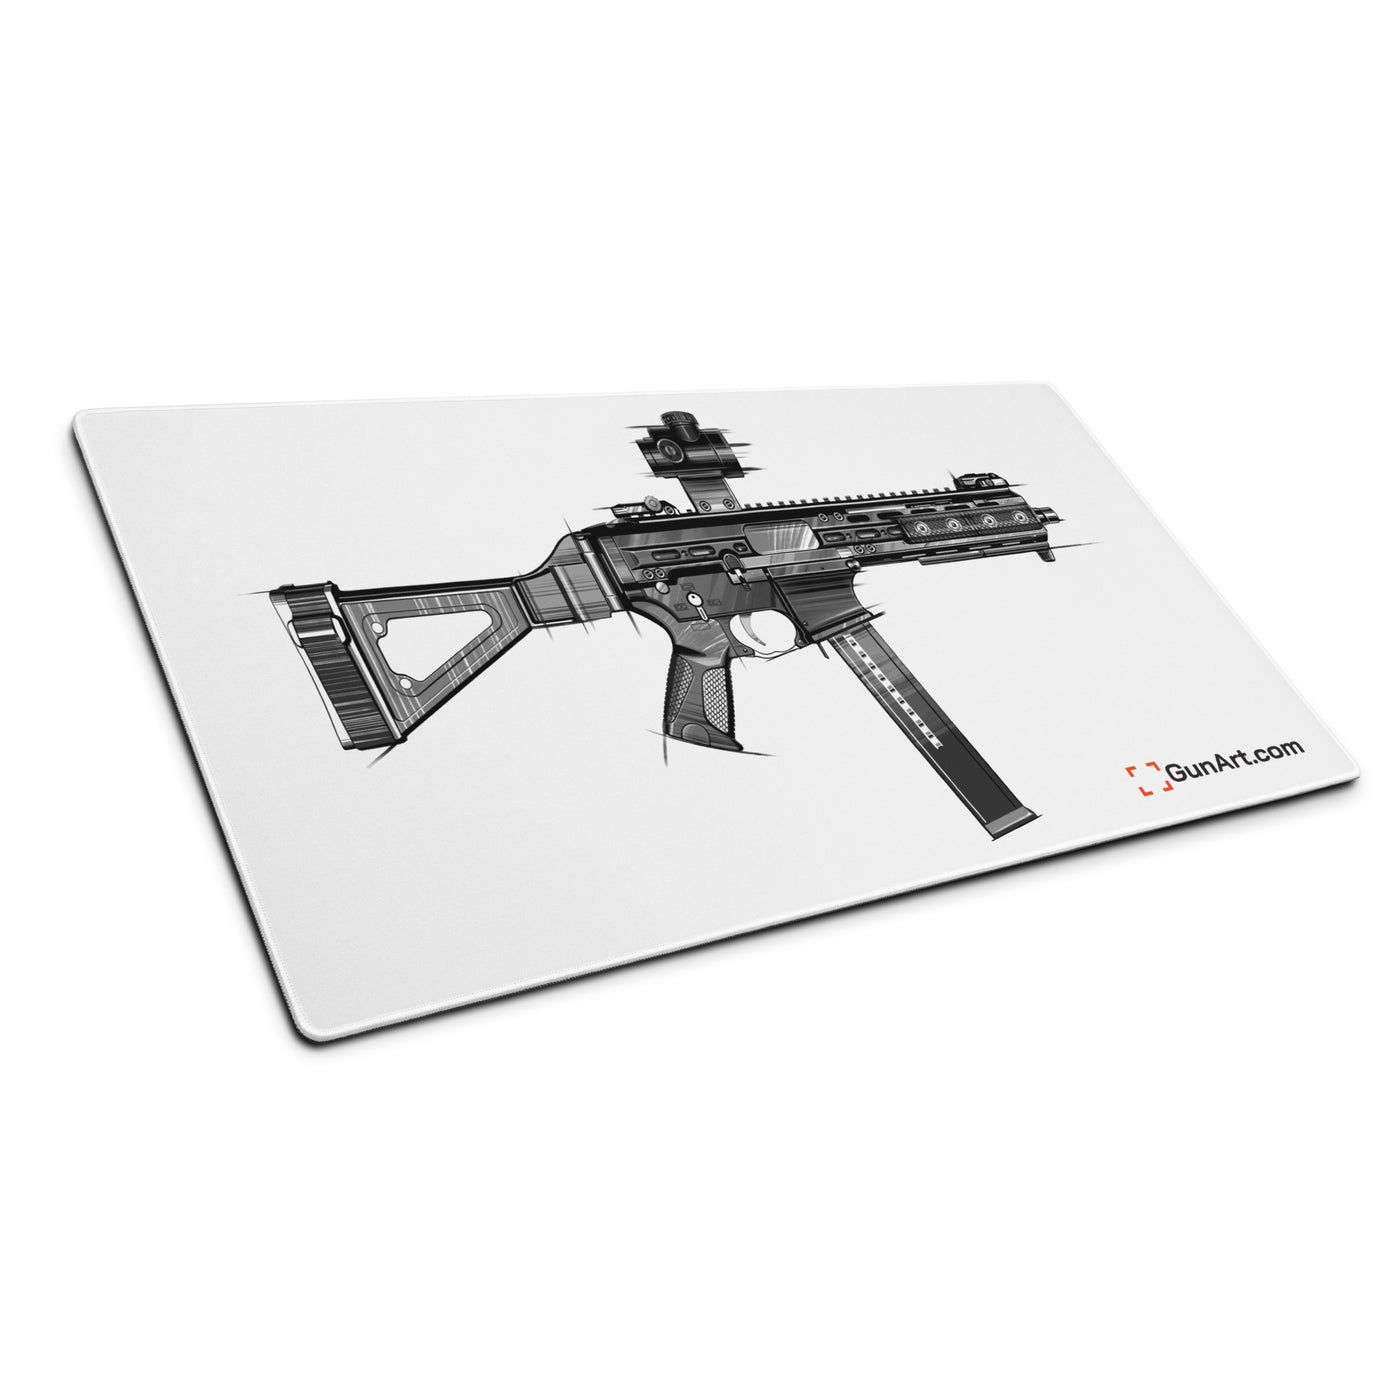 .45 Cal SMG Gaming Mouse Pad - Just The Piece - White Background